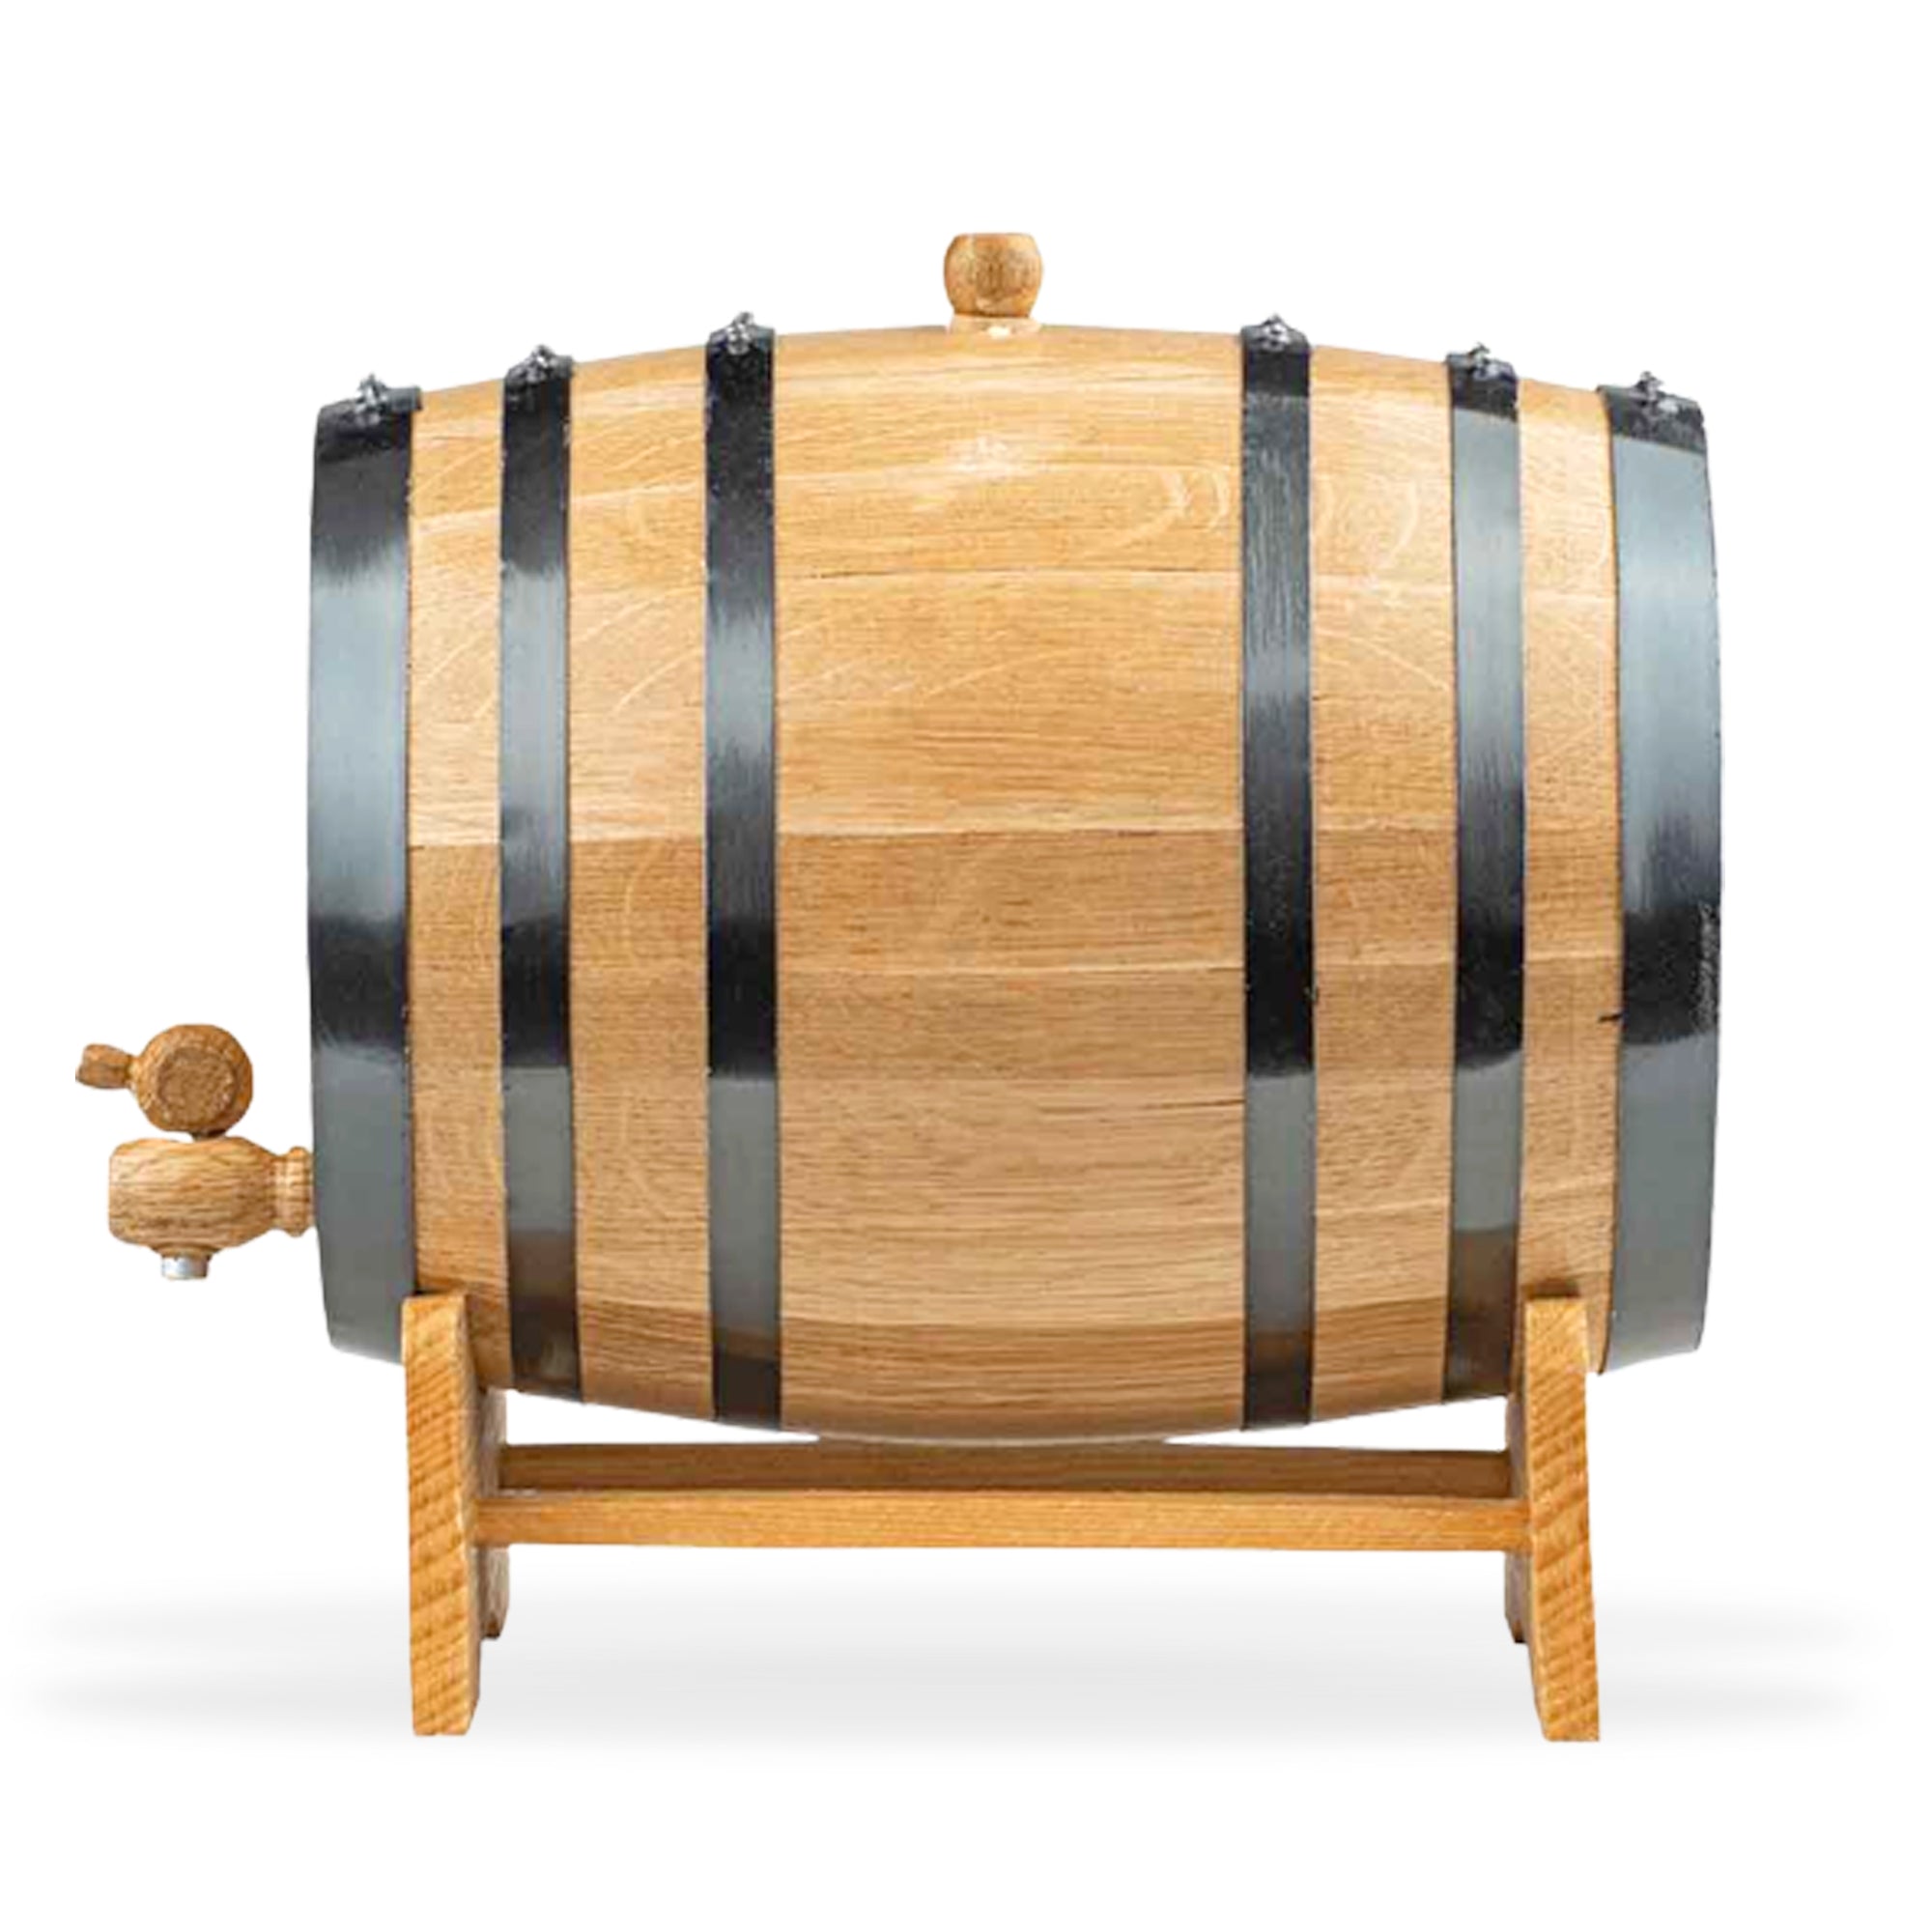 Personalized Whiskey Barrel + Whiskey Making Kit | The Home Distiller's Choice for DIY Spirits | Distilling Co. Series - Blind Pig Drinking Co.